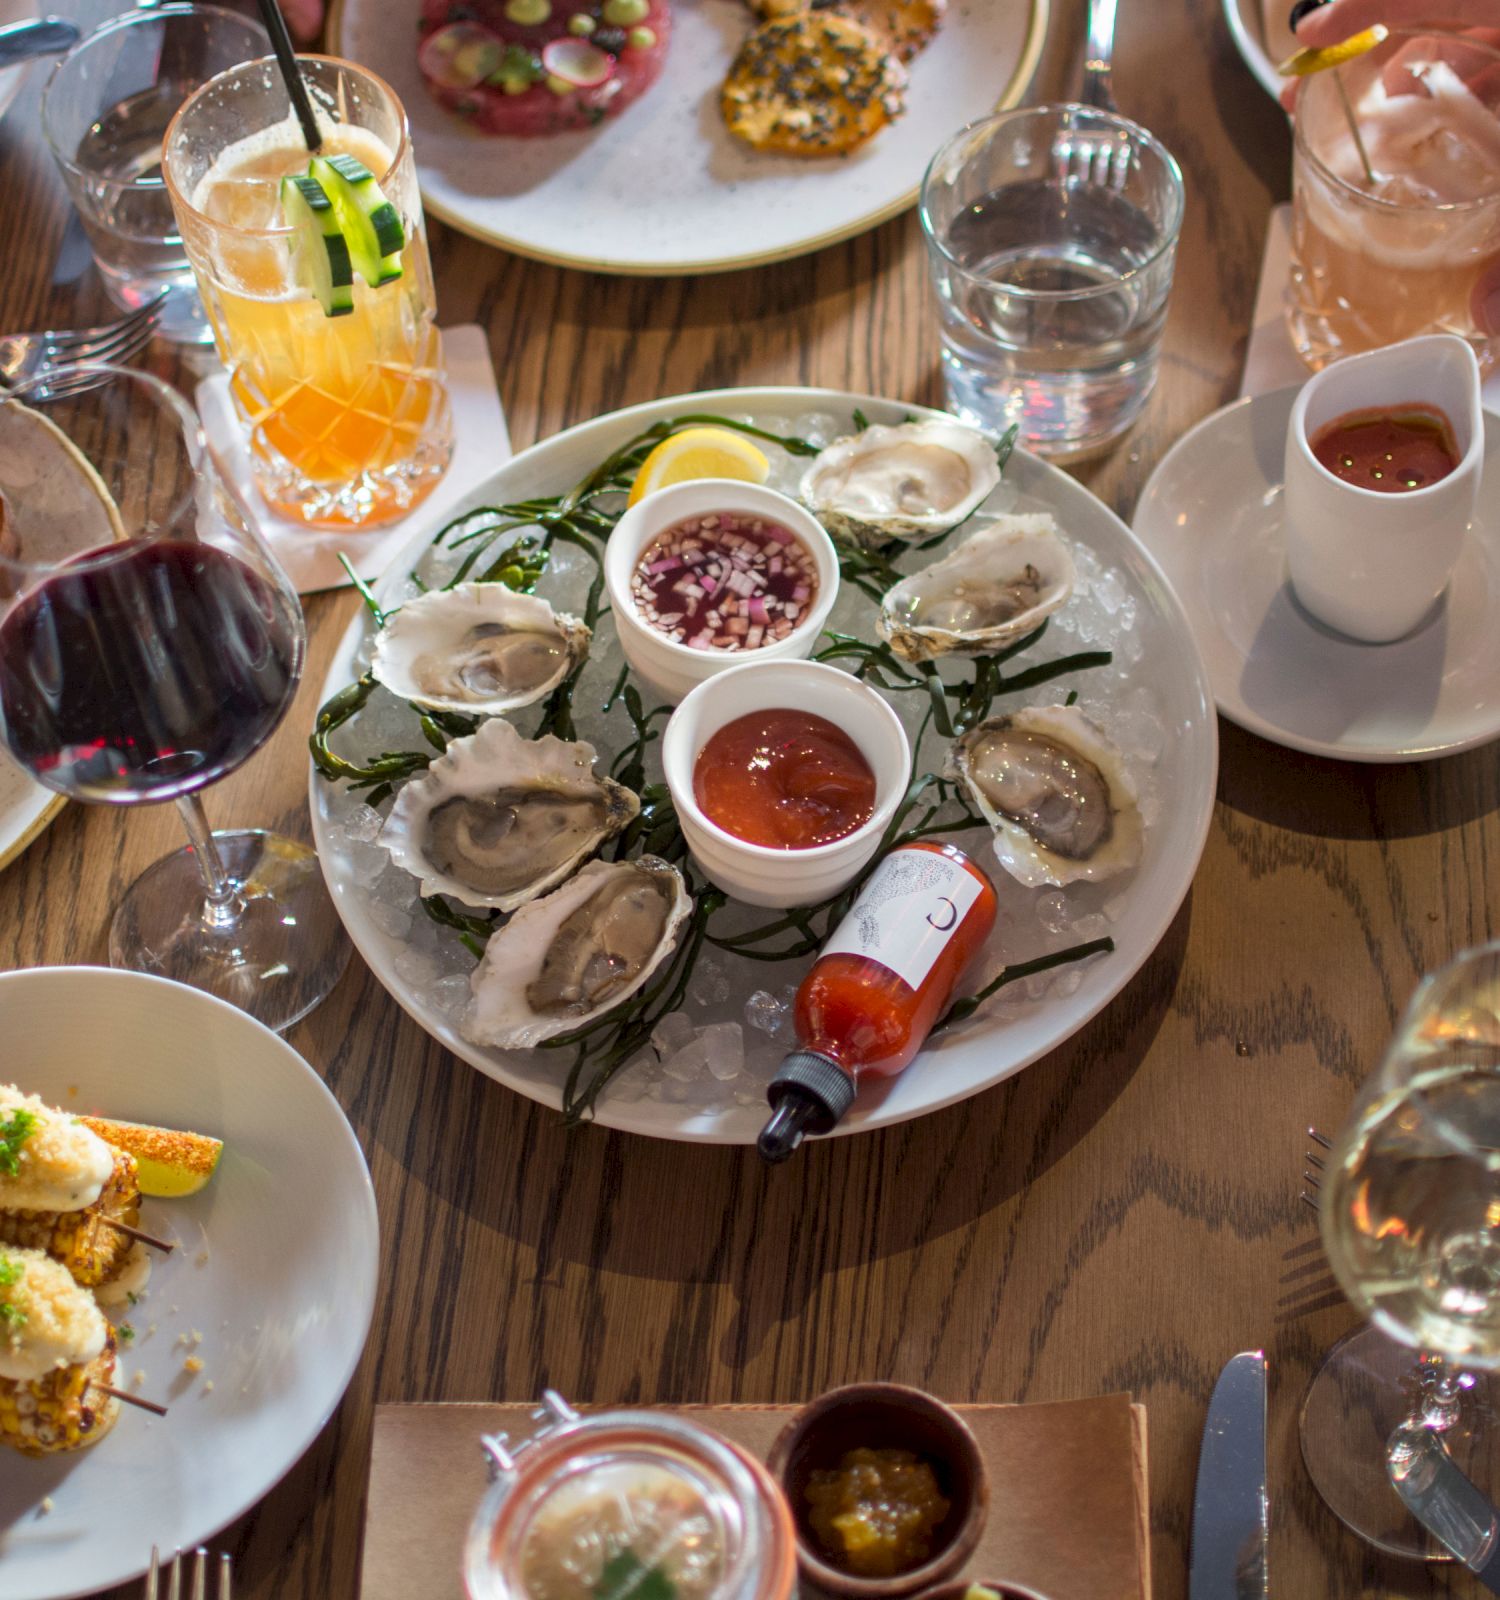 A variety of dishes including oysters, drinks, and appetizers on a wooden table with multiple dining items, sauces, and hands reaching in.